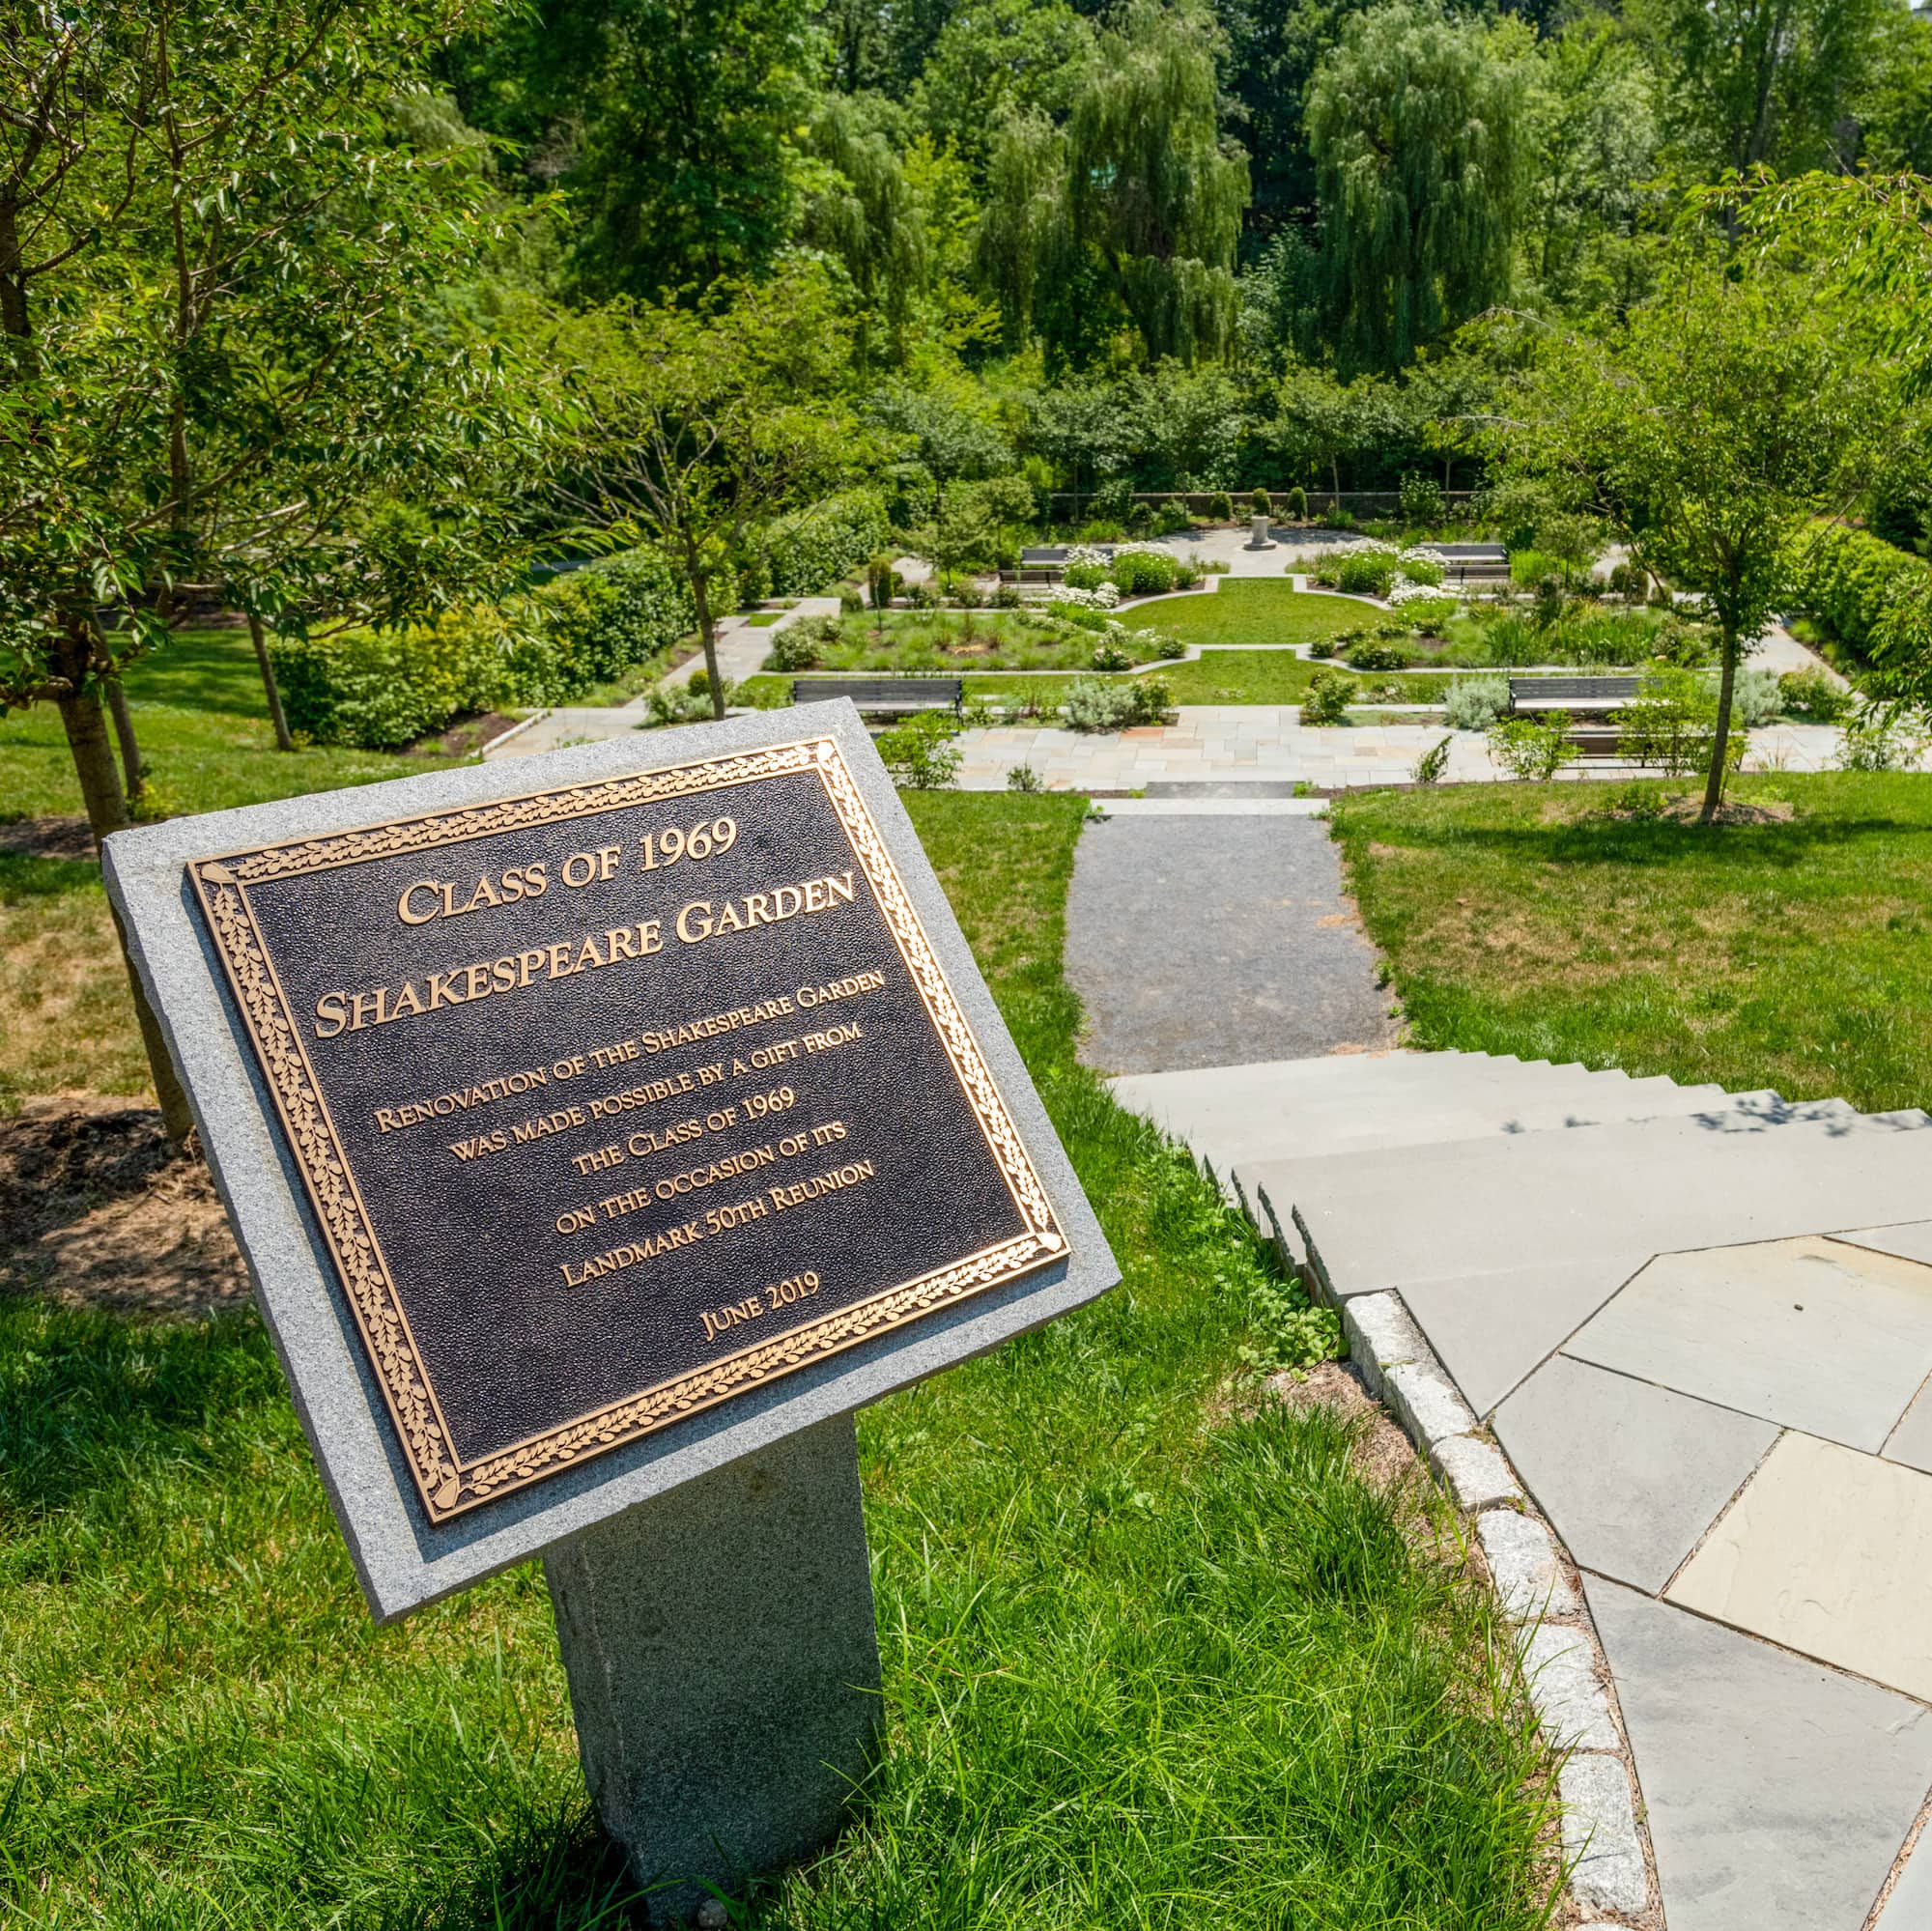 A plaque in front of the Class of 1969 Shakespeare Garden, a garden of different trees, flowers, and bushes laid out in multiple tiers on the Vassar campus, noting that the renovation of the garden was made possible by donations of the Class of 1969 on their 50th Reunion.